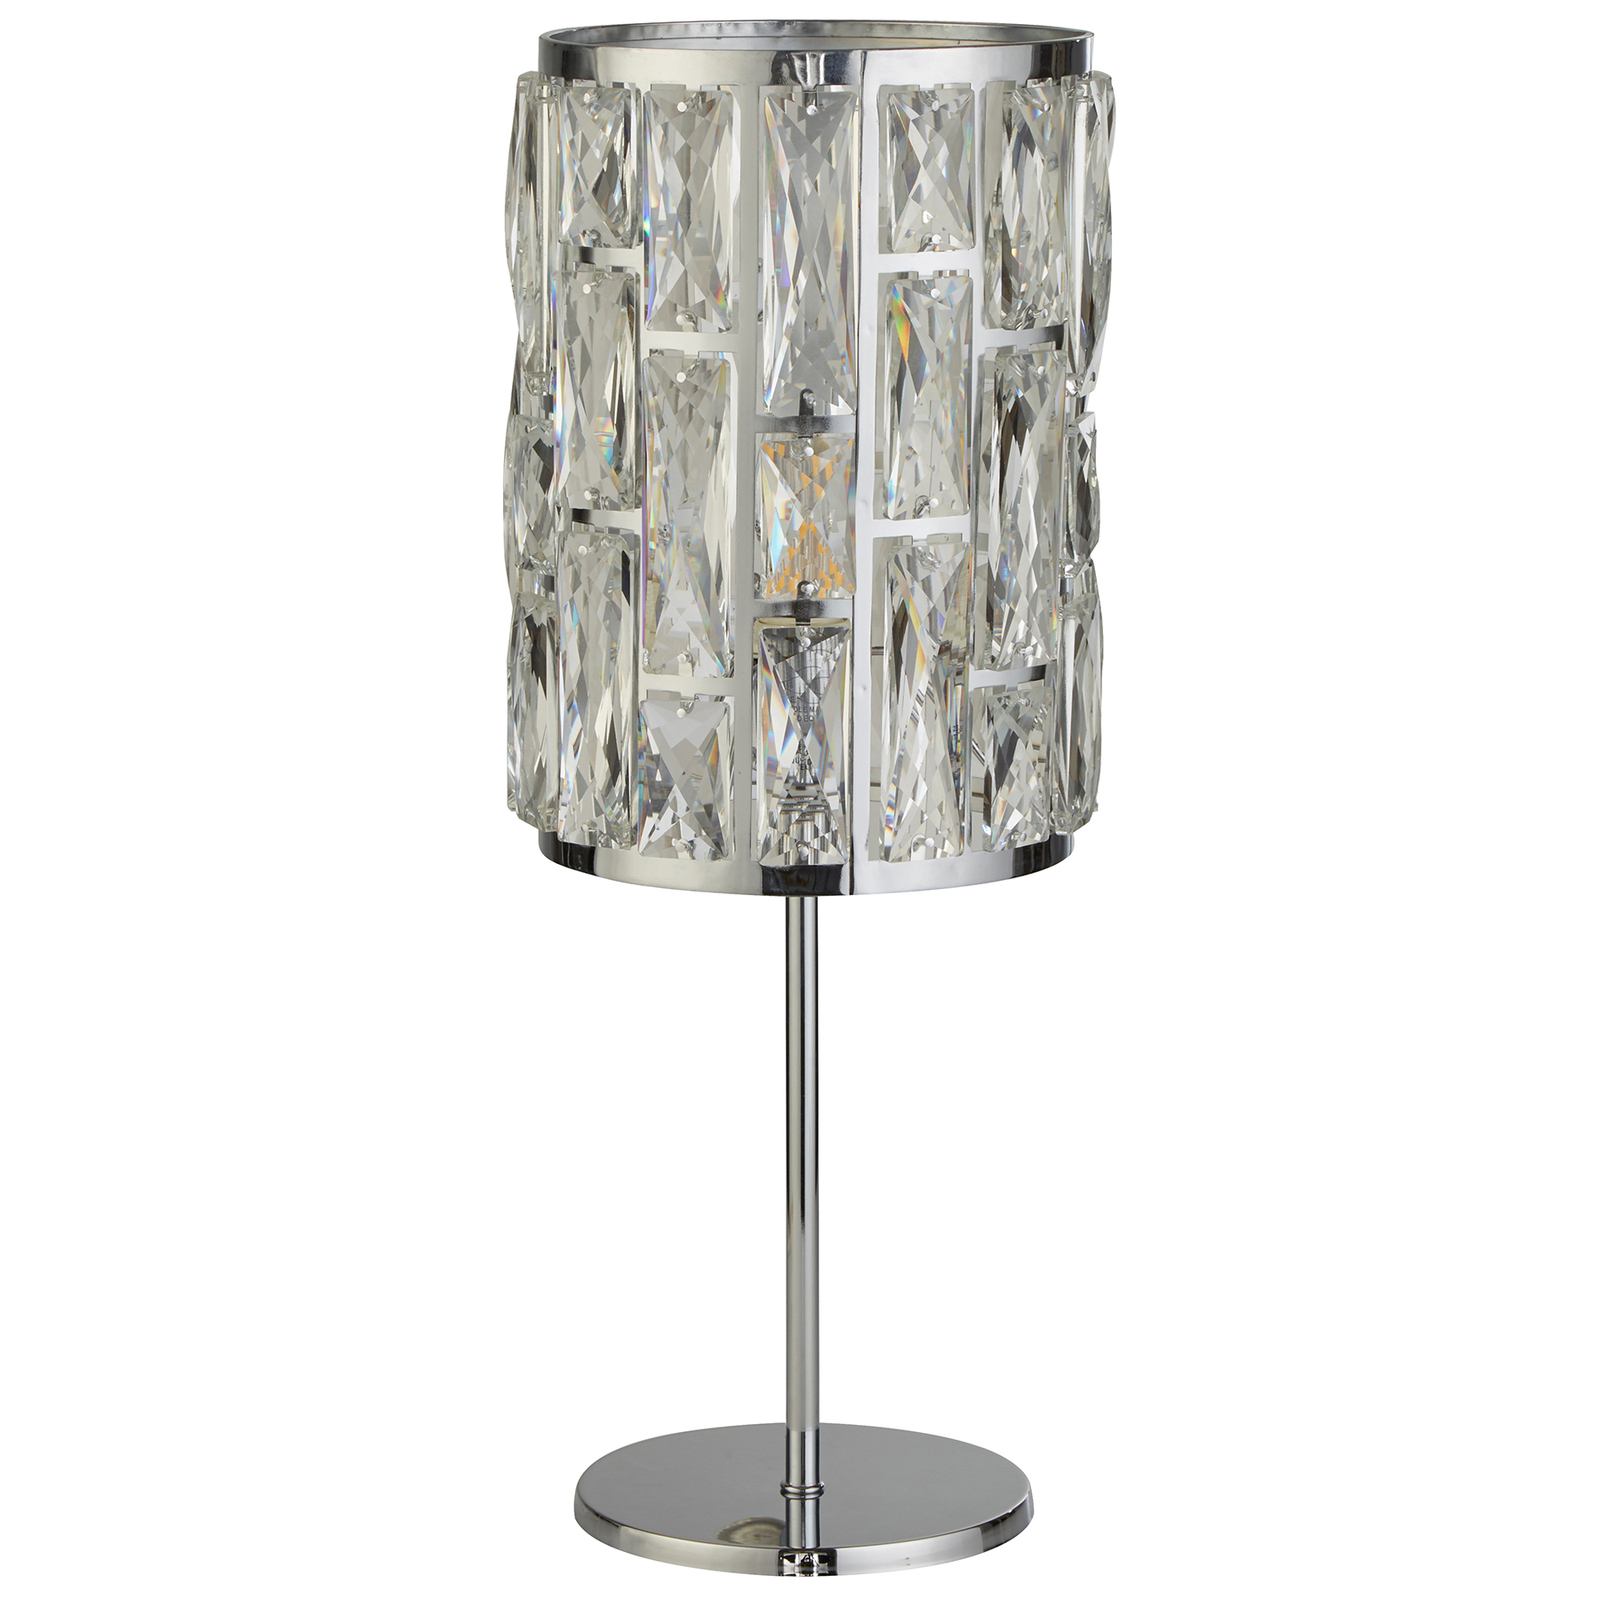 Bijou table lamp with crystals